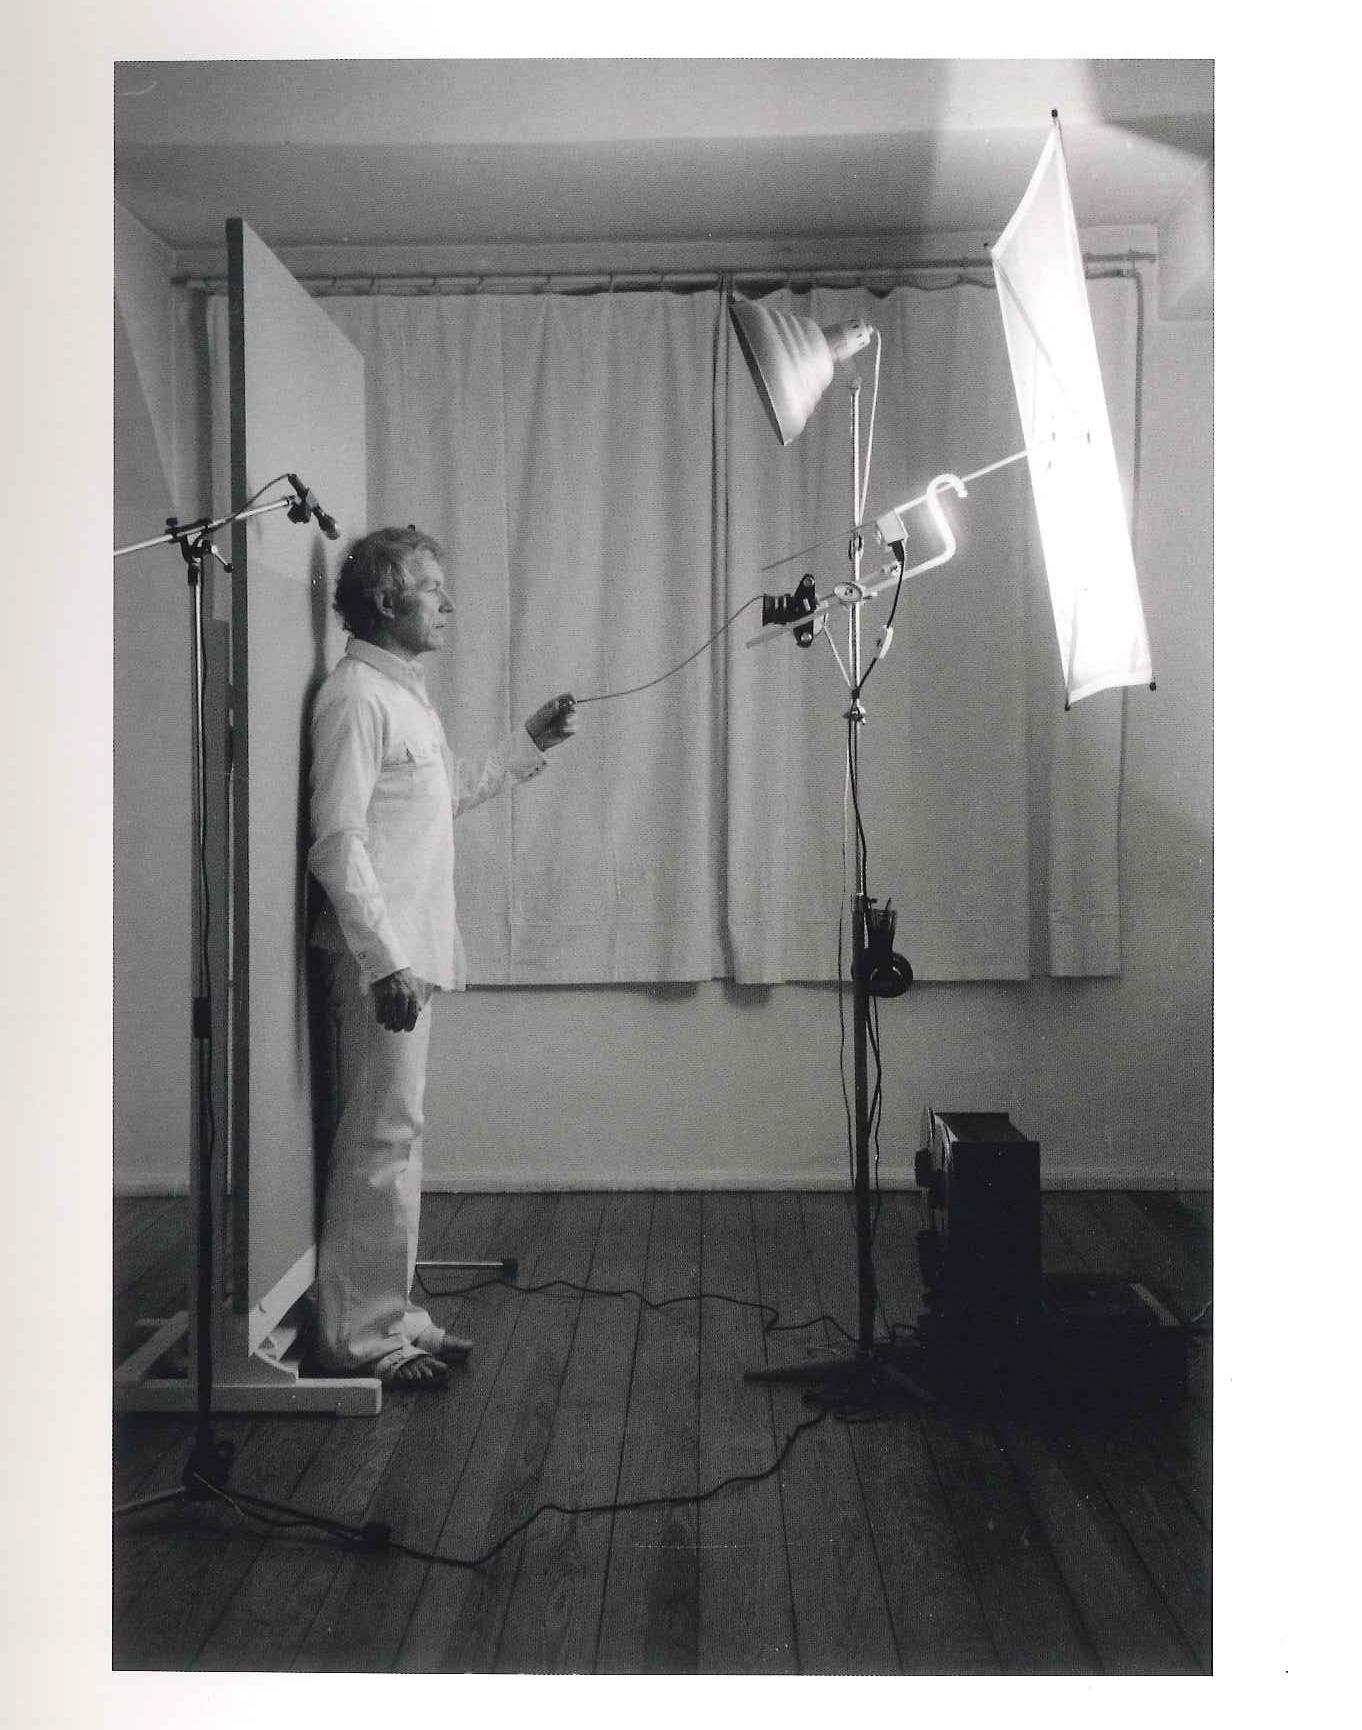 Happy Birthday to Roman Opalka, who would have been 84 today. Photo of Opalka taking one of his self-portraits c.1976 